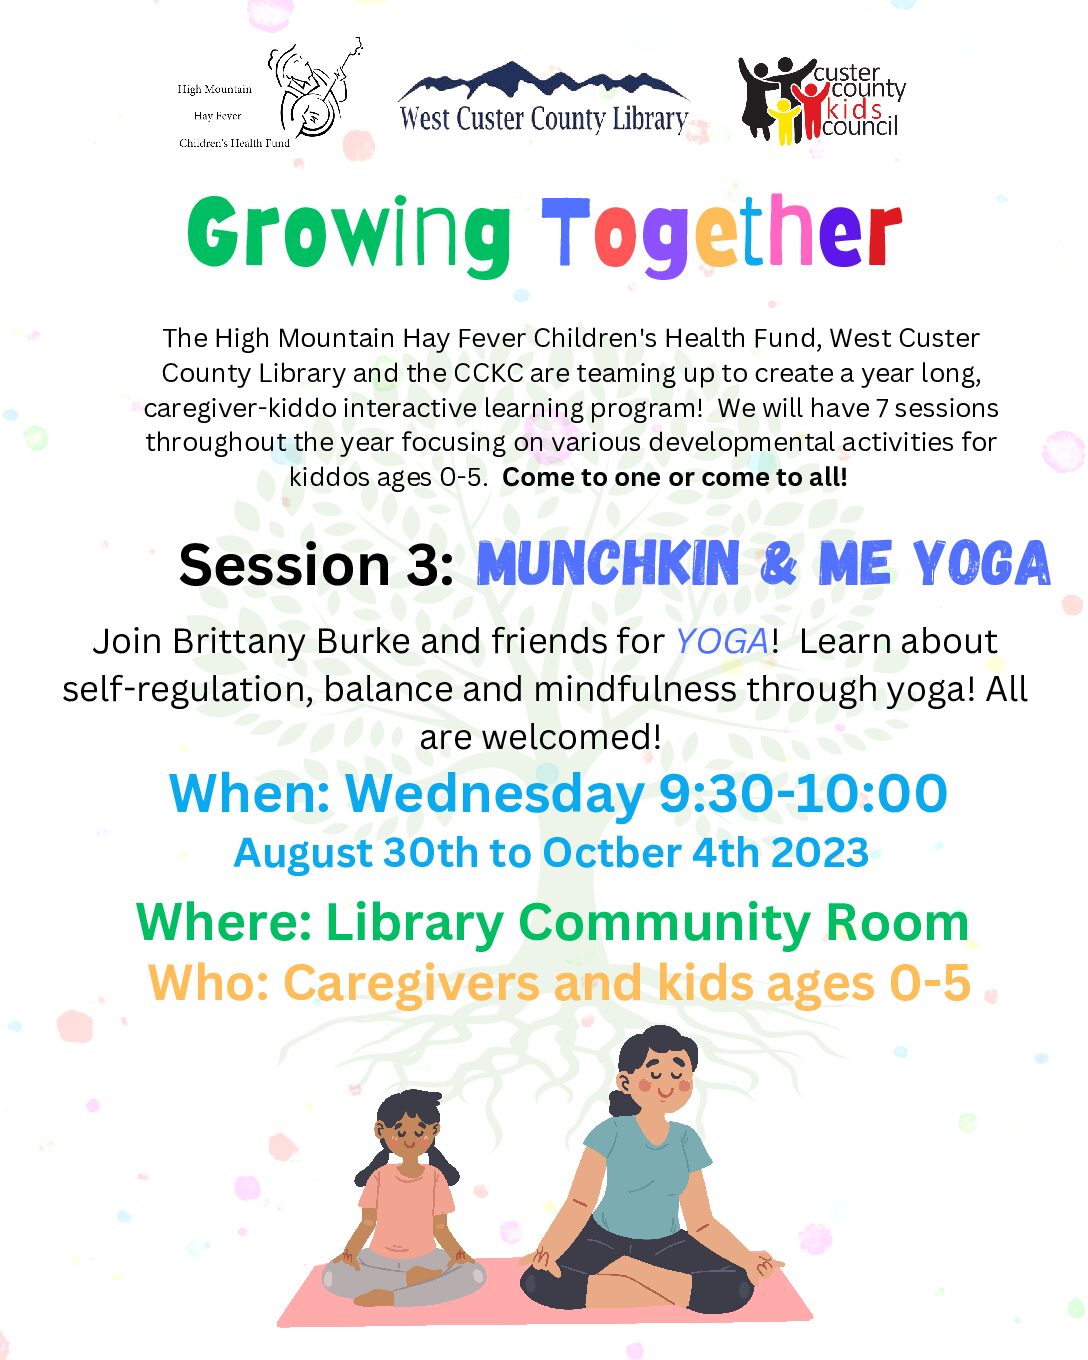 Growing Together flyer for kids 0-5 featuring Yoga